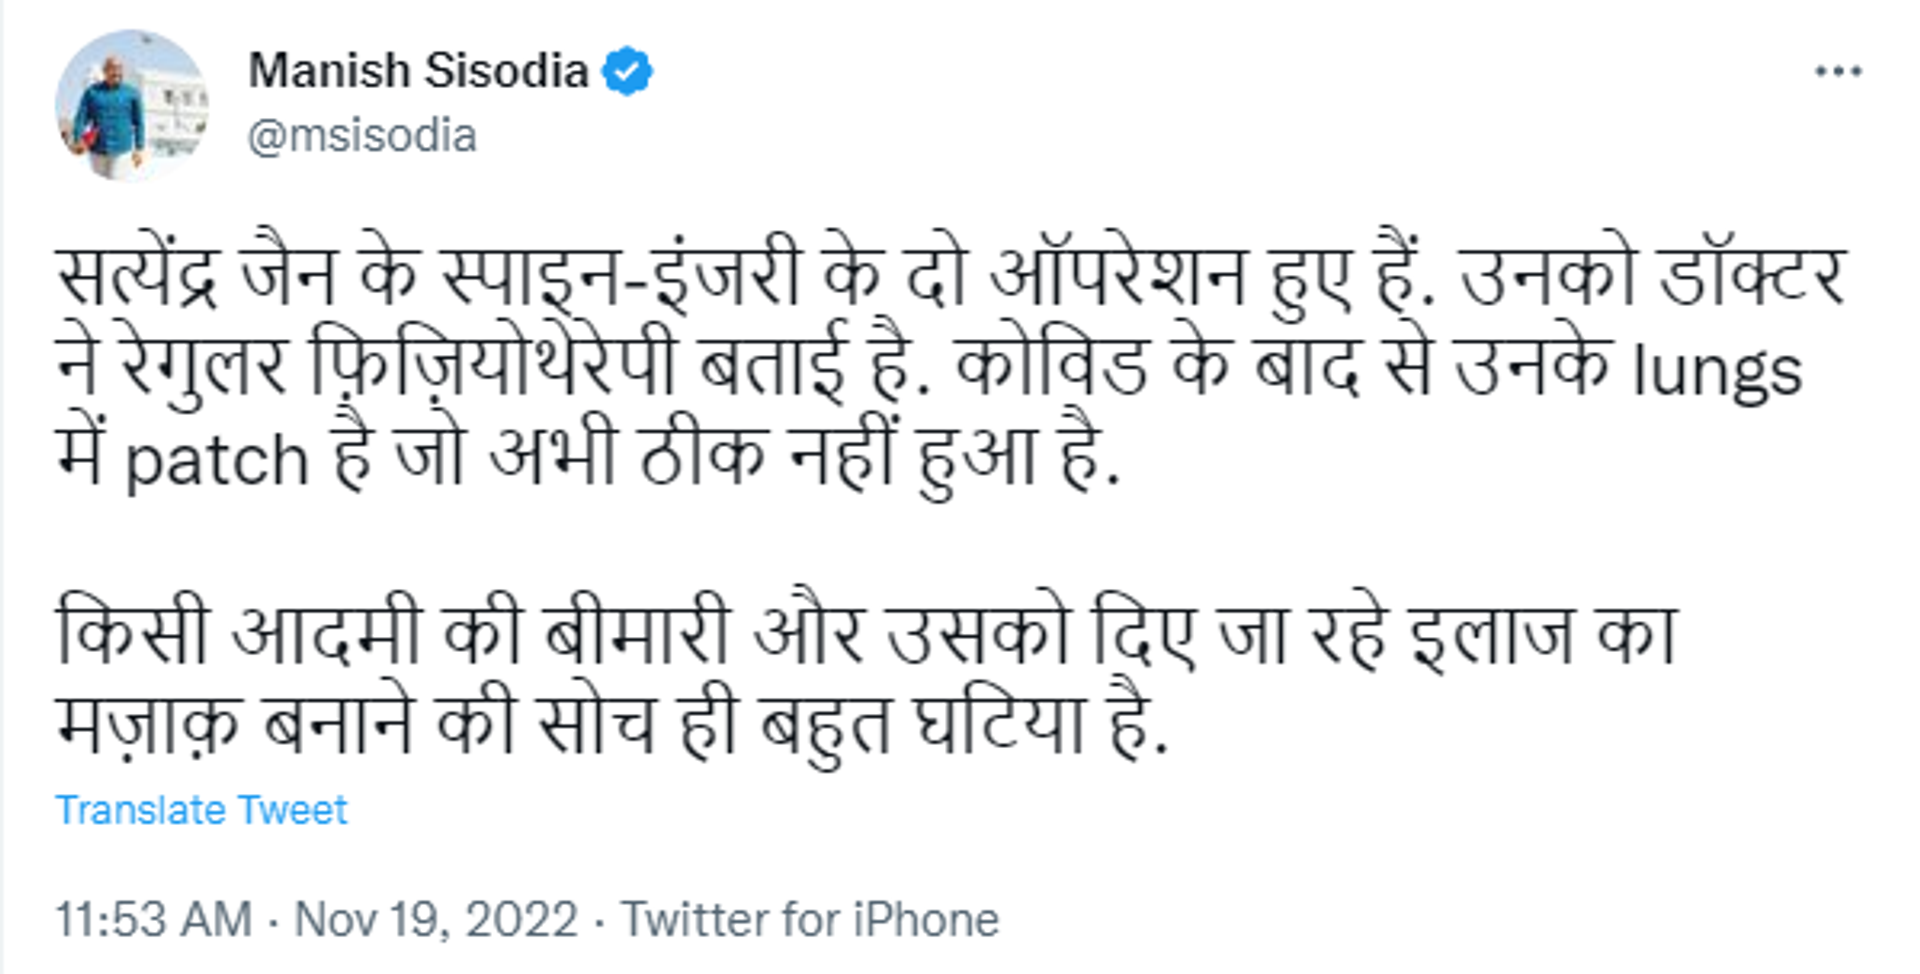 Delhi Deputy State Chief Manish Sisodia Defends Jailed AAP Minister after His Video of Getting Massage in Jail Goes Viral - Sputnik International, 1920, 19.11.2022